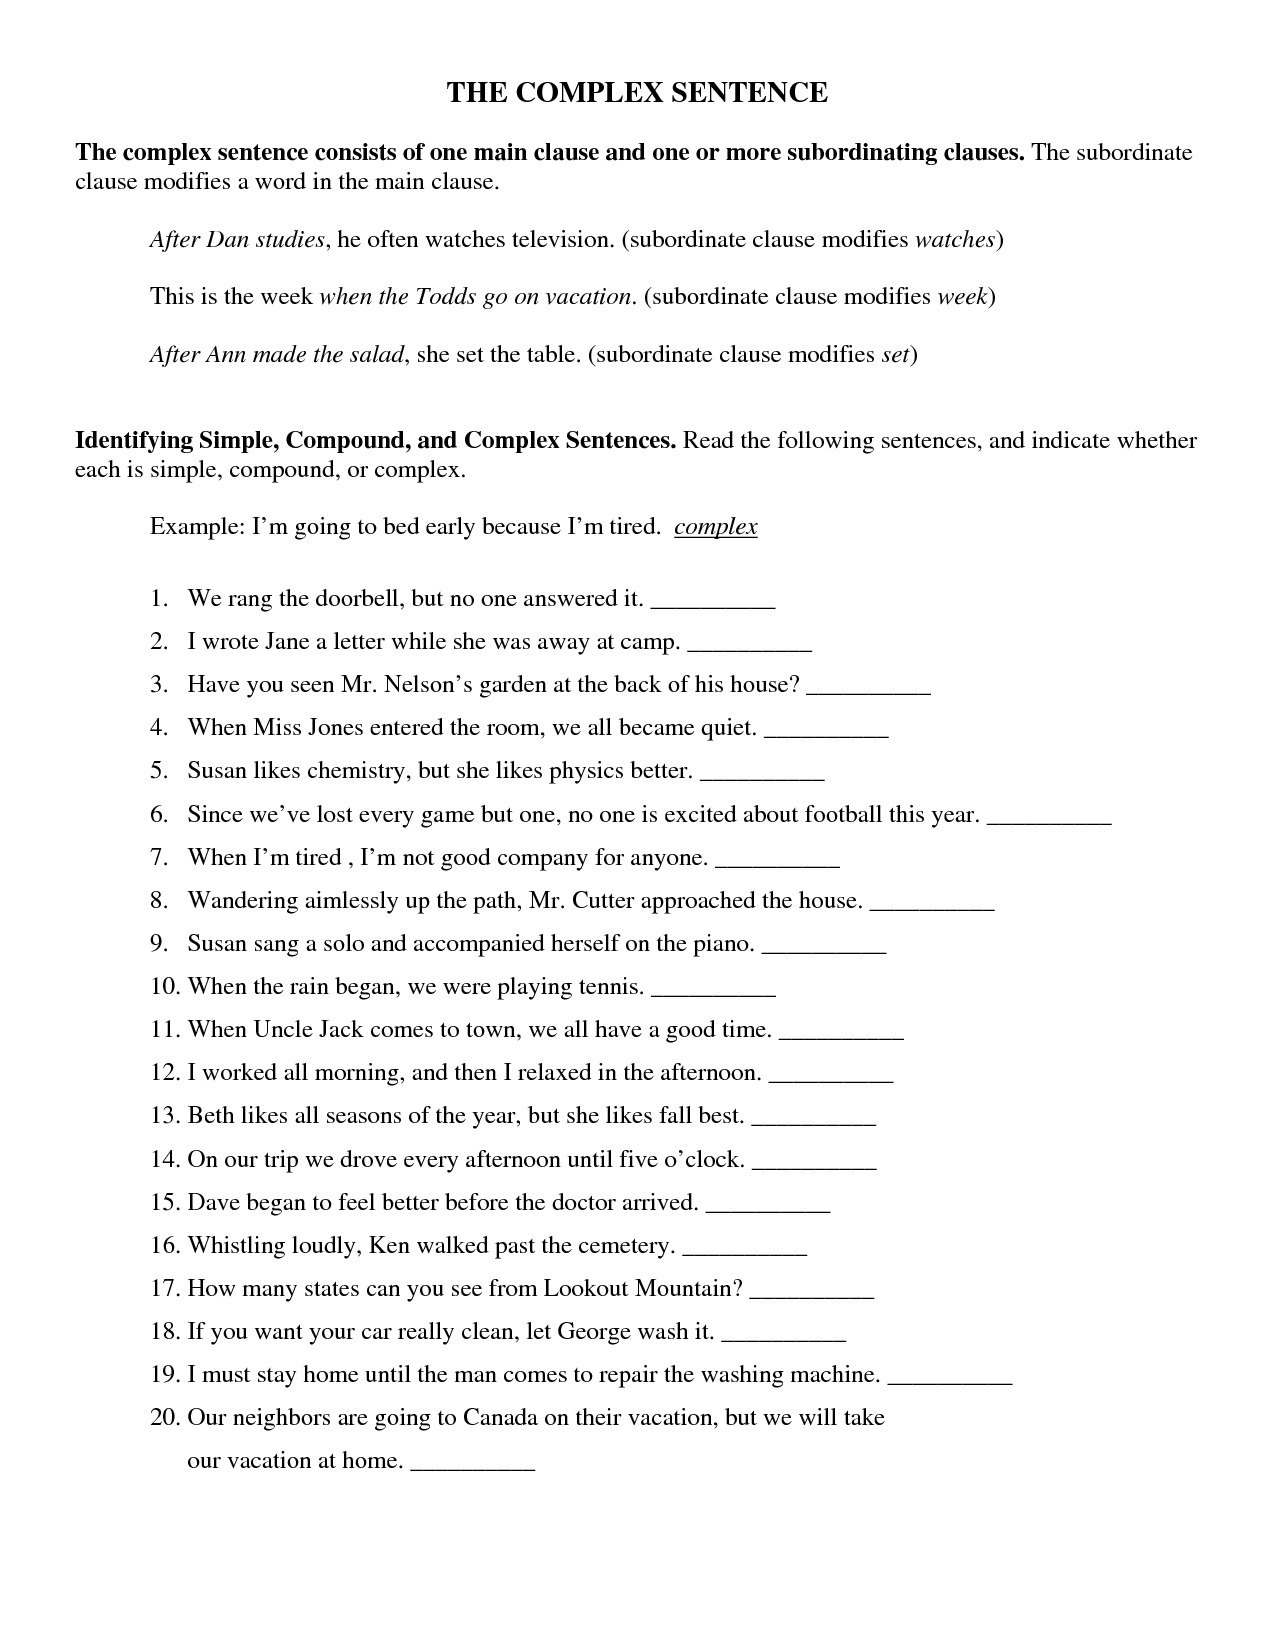 Worksheets Identifying Simple Compound And Complex Sentences